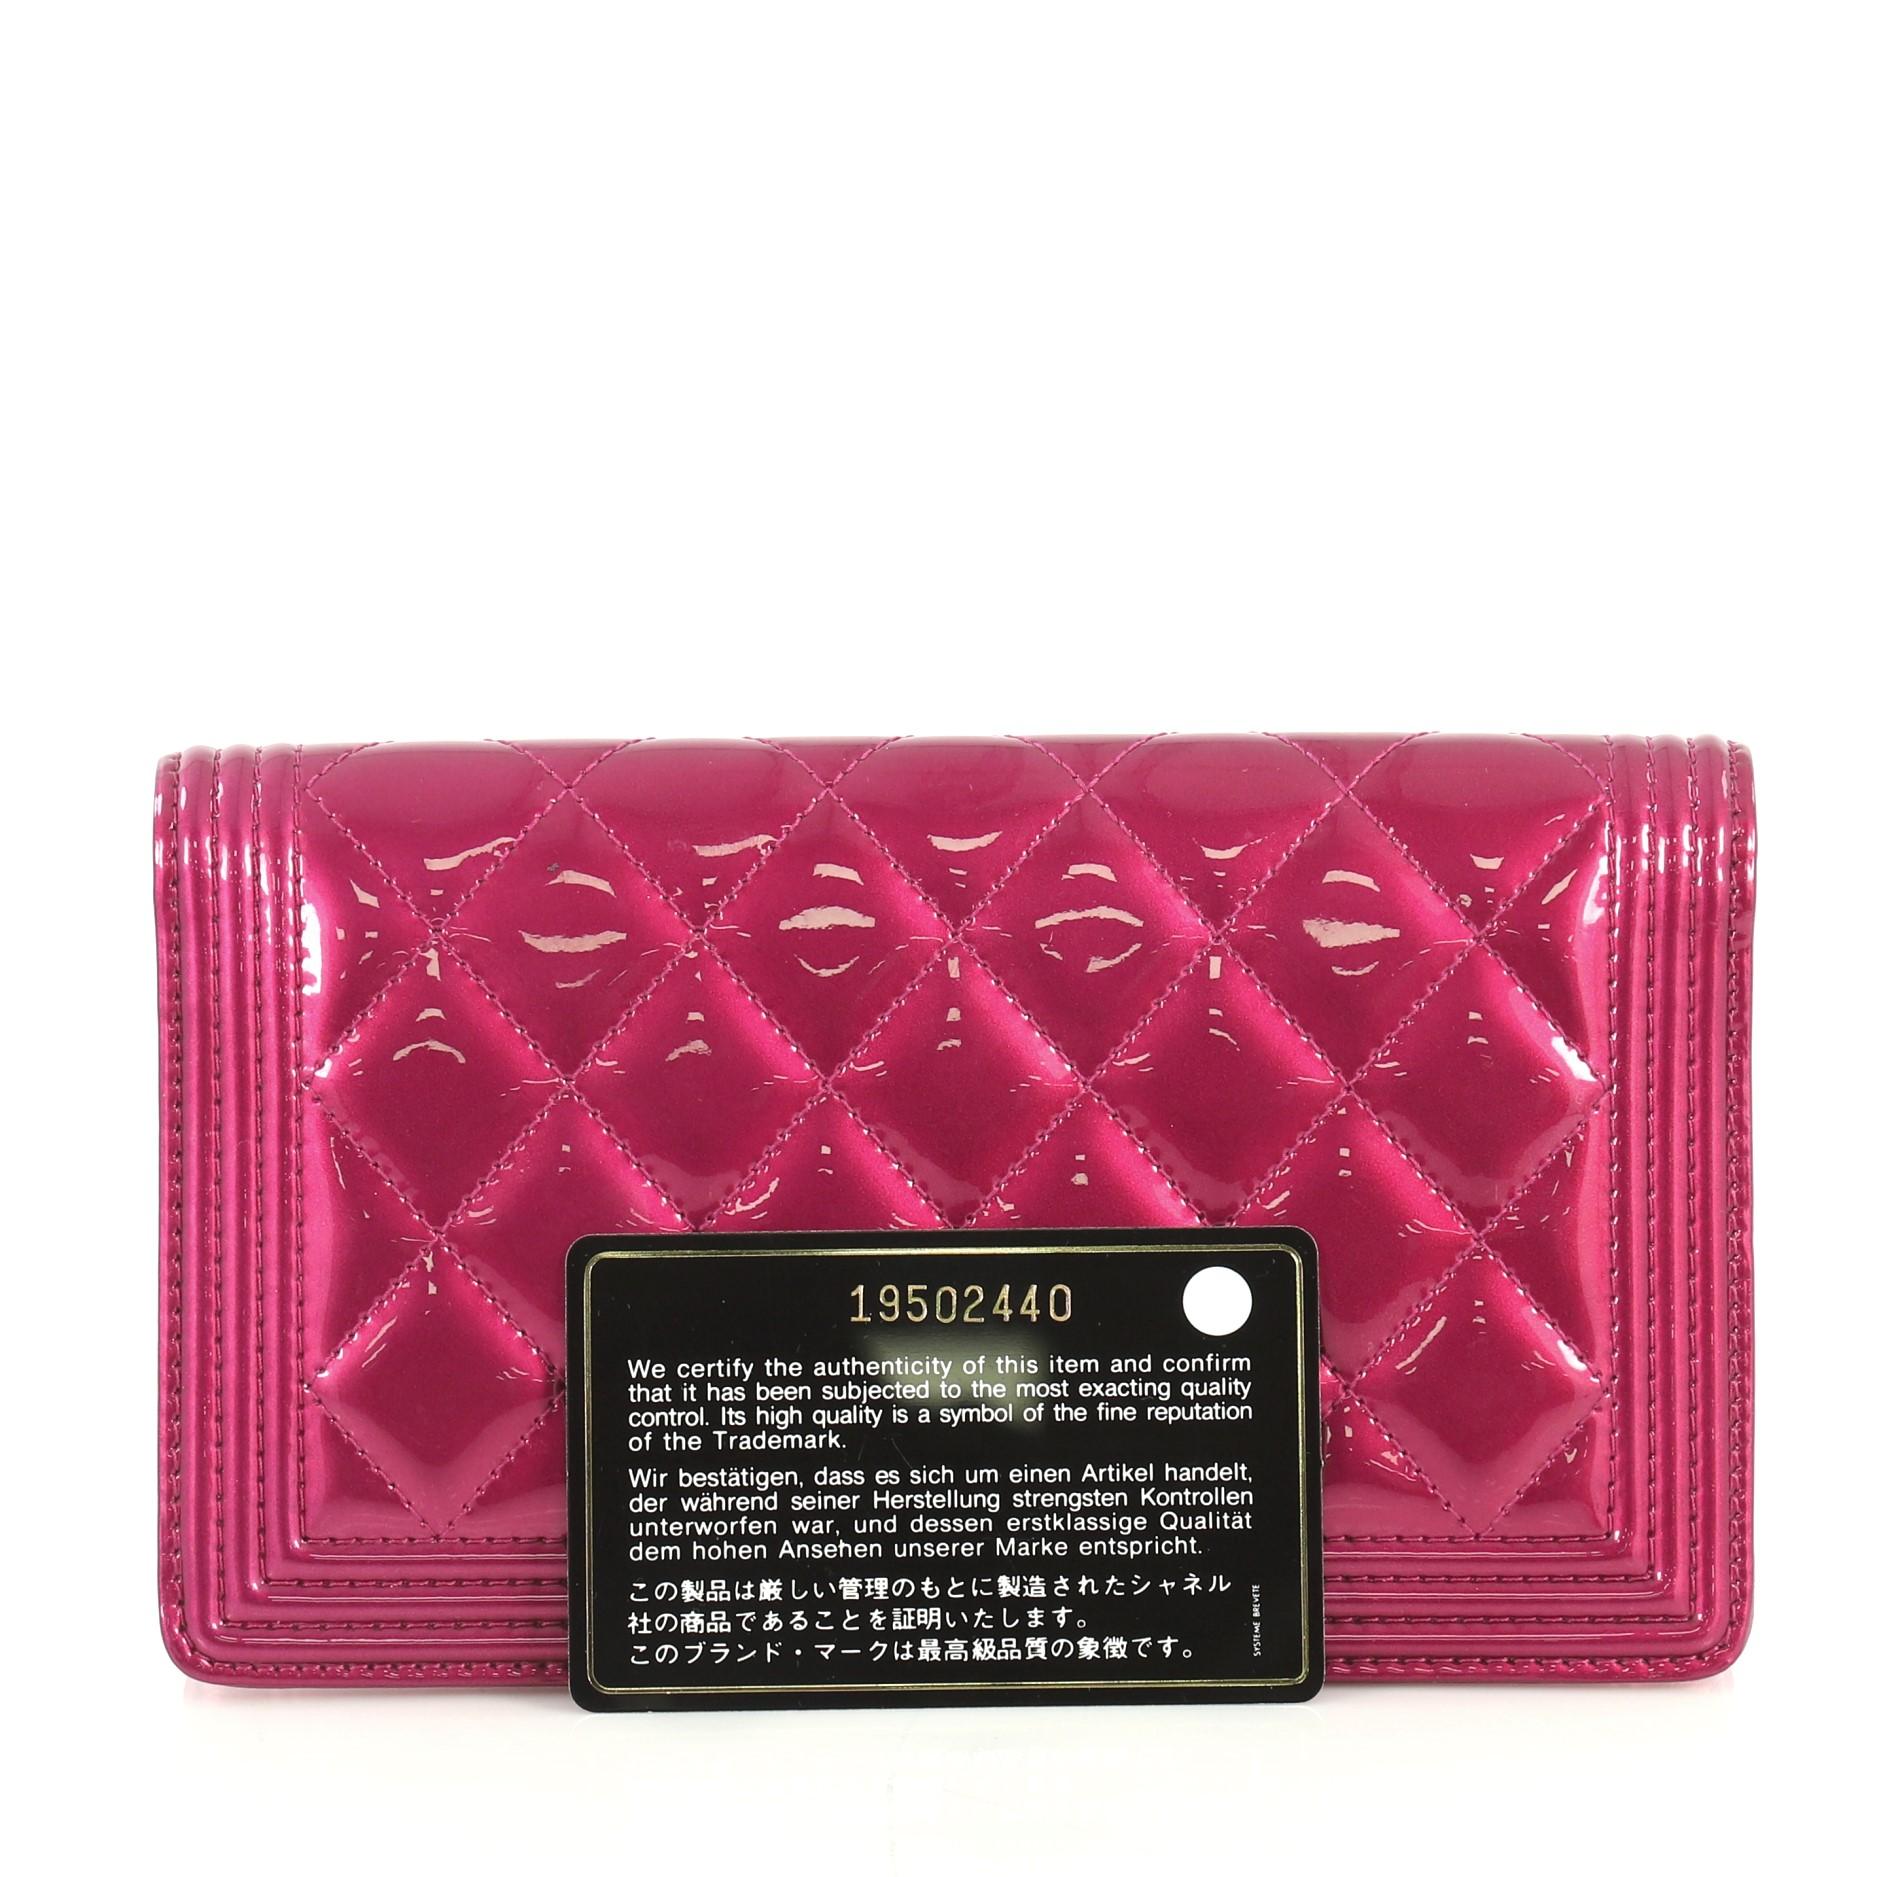 This Chanel Boy Yen Wallet Quilted Patent, crafted in pink quilted patent, features CC boy logo and gunmetal-tone hardware. It opens to a pink leather interior with multiple card slots and slip and zip pockets. Hologram sticker reads: 19502440.